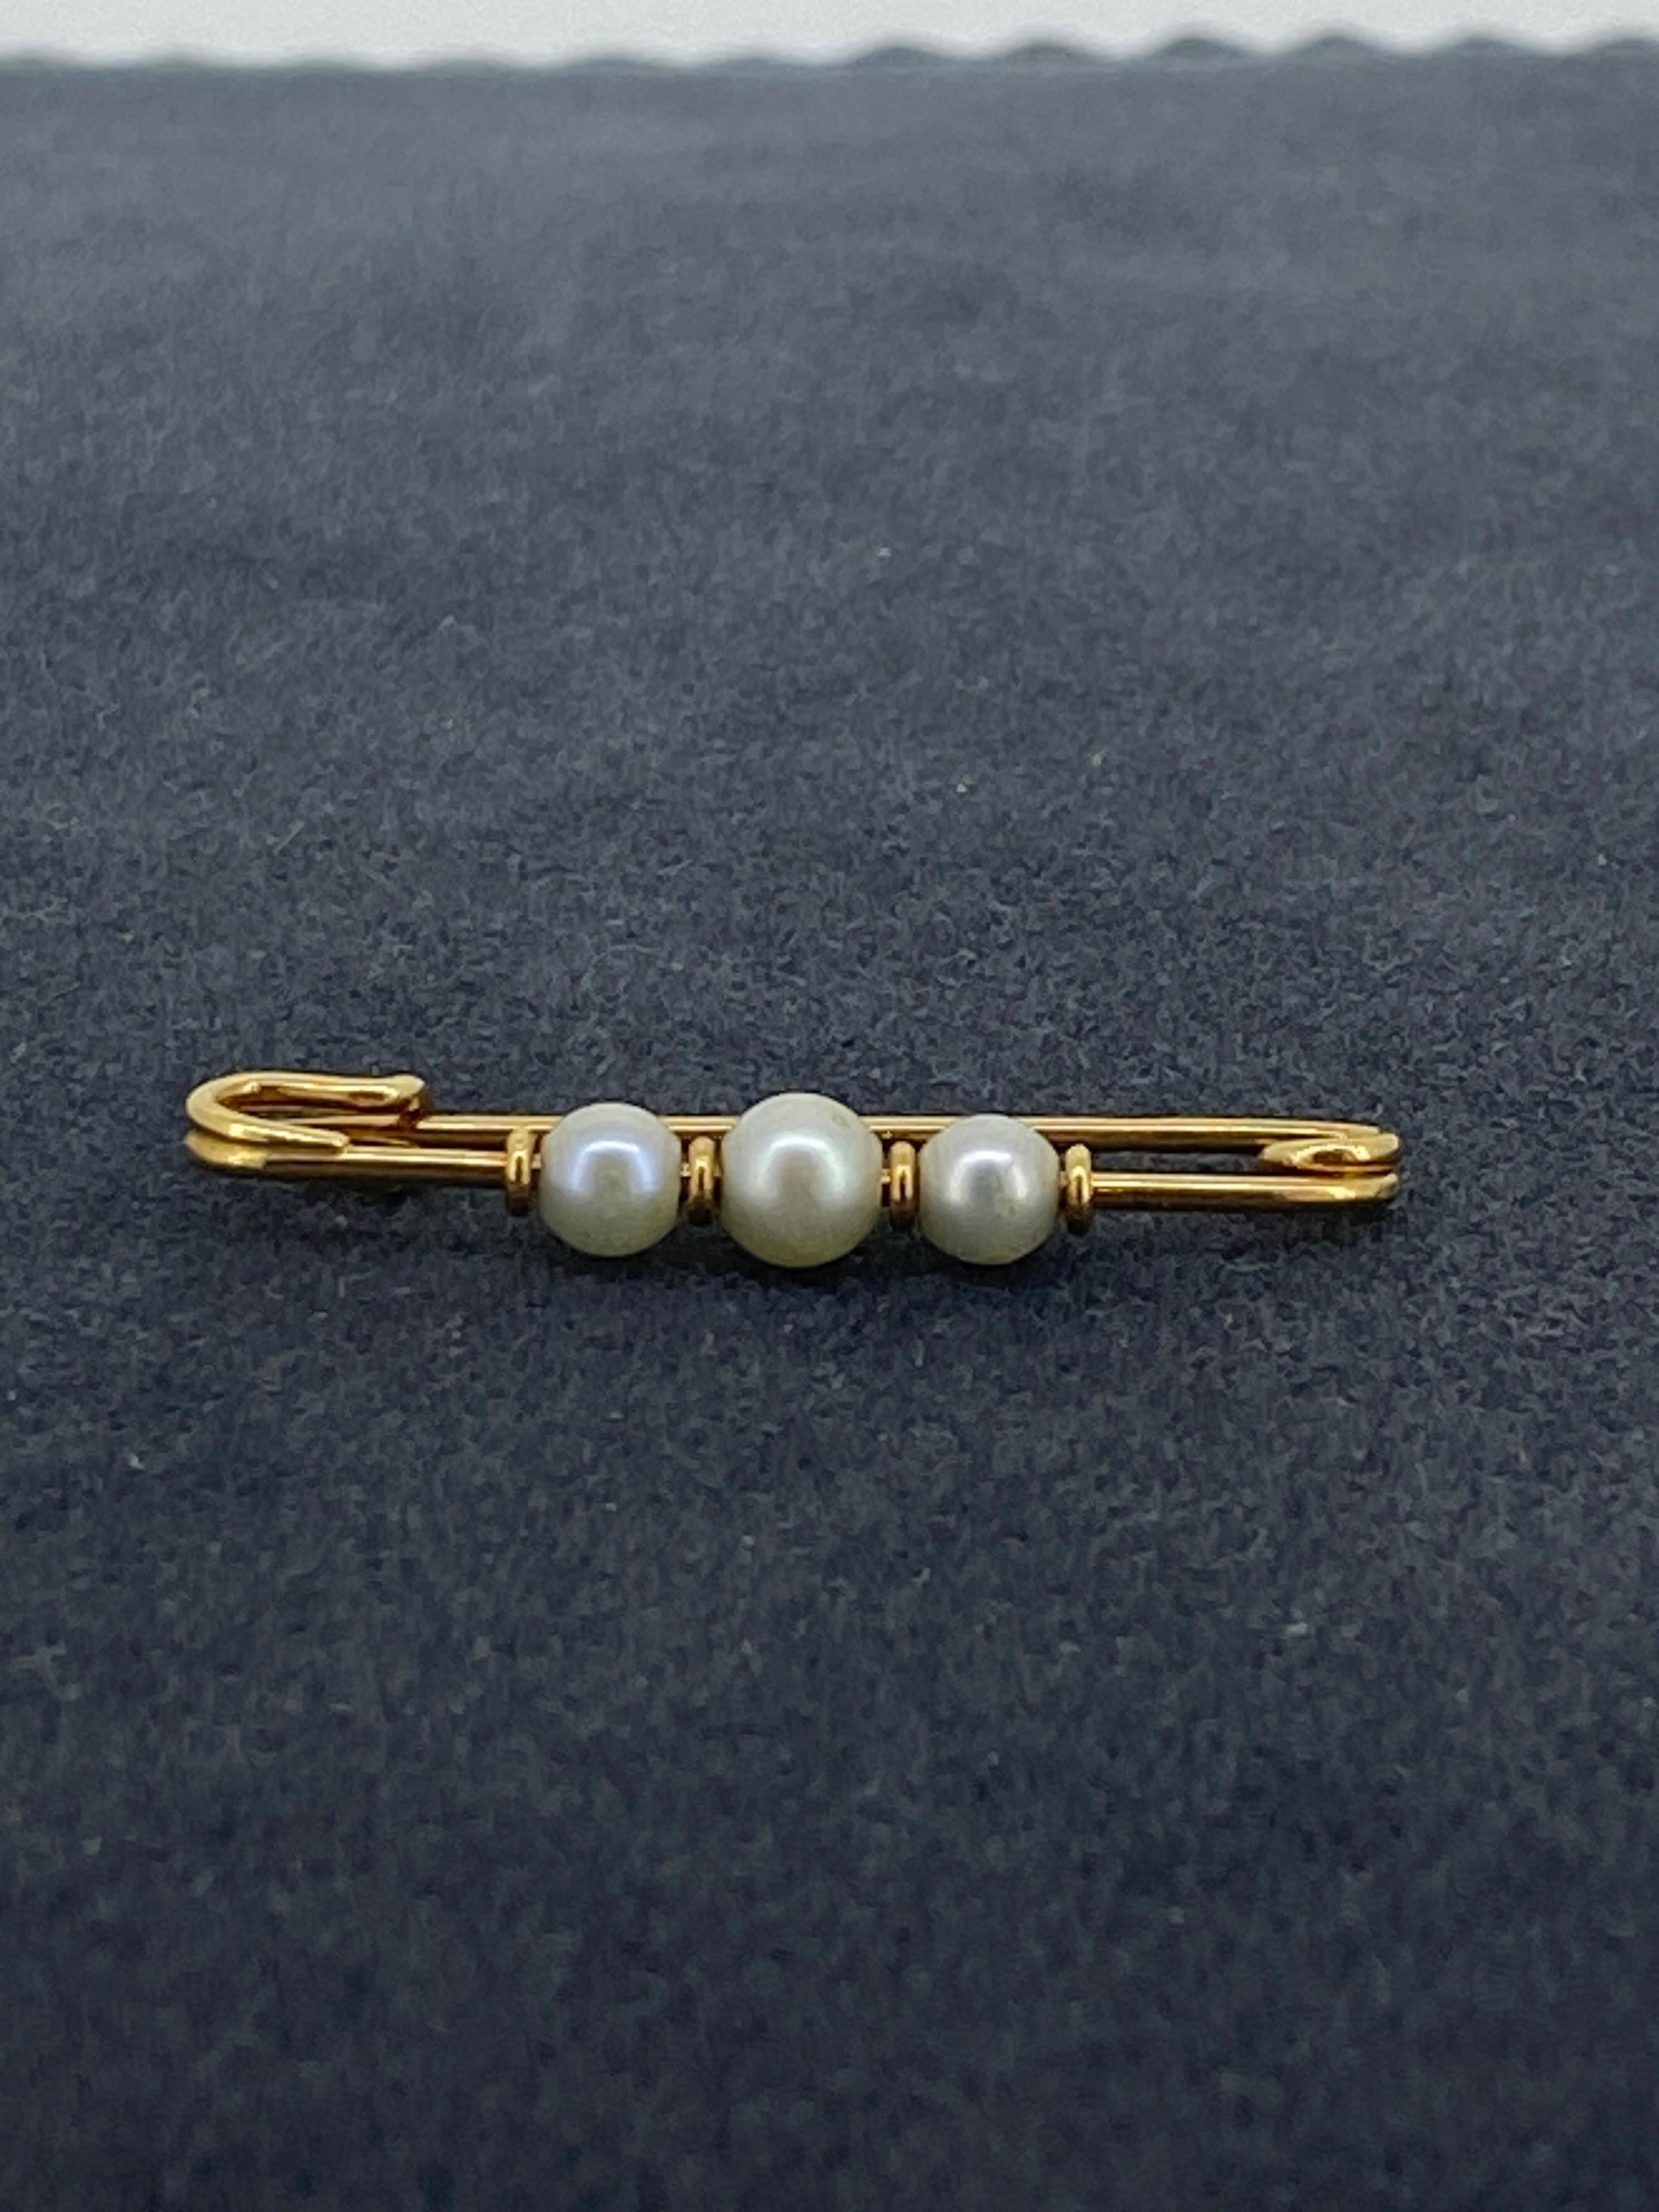 Add a touch of vintage glamour to your outfit with this stunning 18K rose gold pin from the 1950s. 

The pin features three round pearls (4mm - 5.5mm), set in a delicate design, 
creating a timeless and elegant look. 

The Italian hallmarks on this